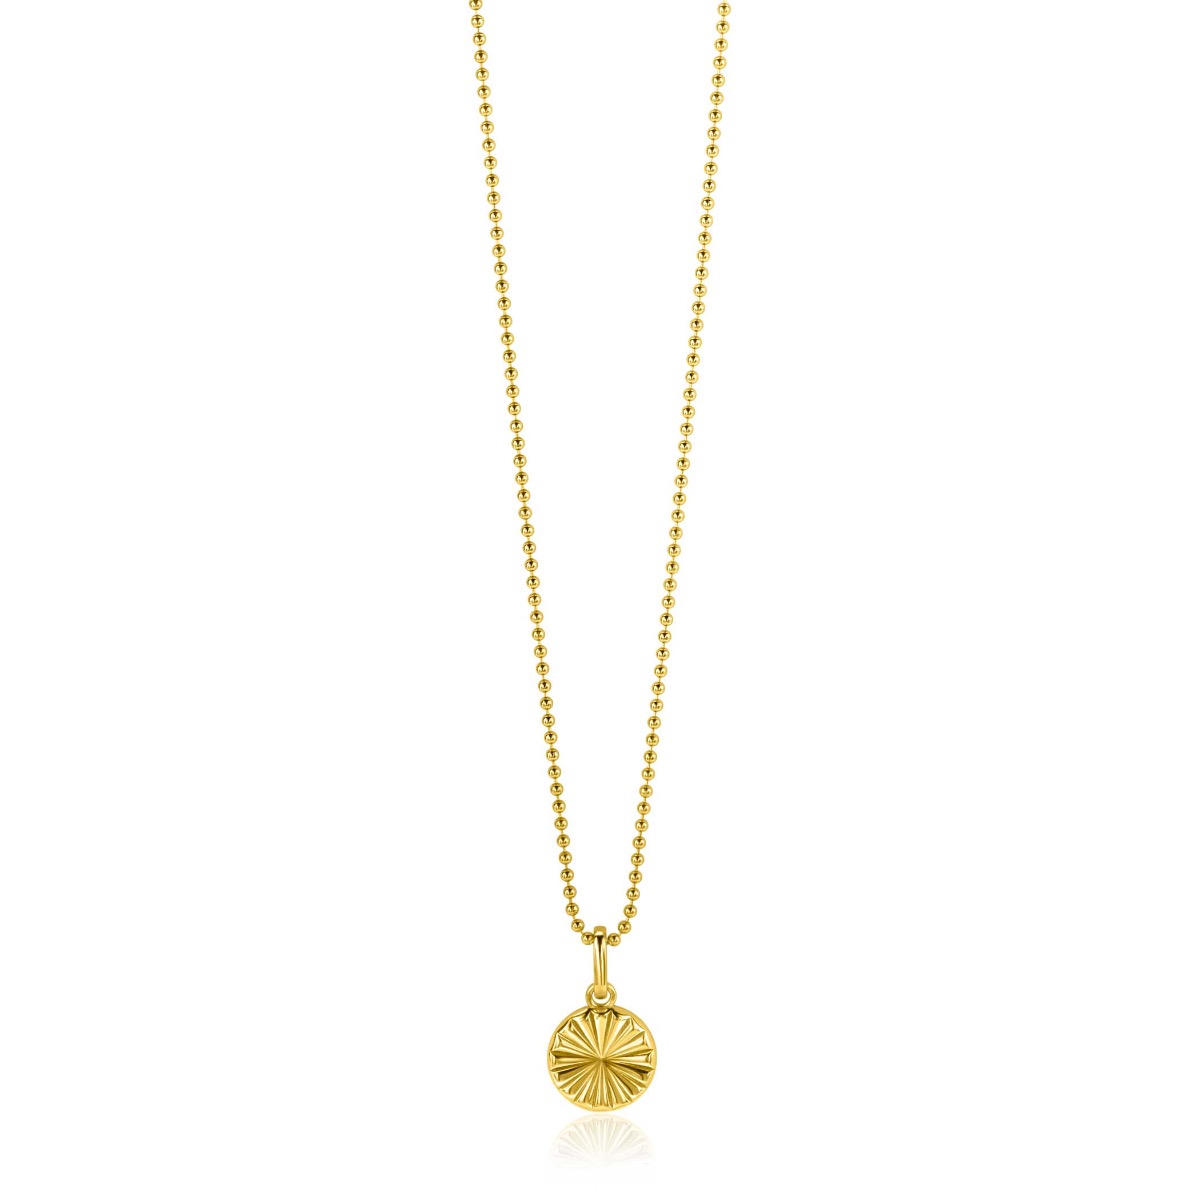 10mm ZINZI Gold Plated Sterling Silver Pendant Coin with Sunbeams ZIH2296S (excl. necklace)